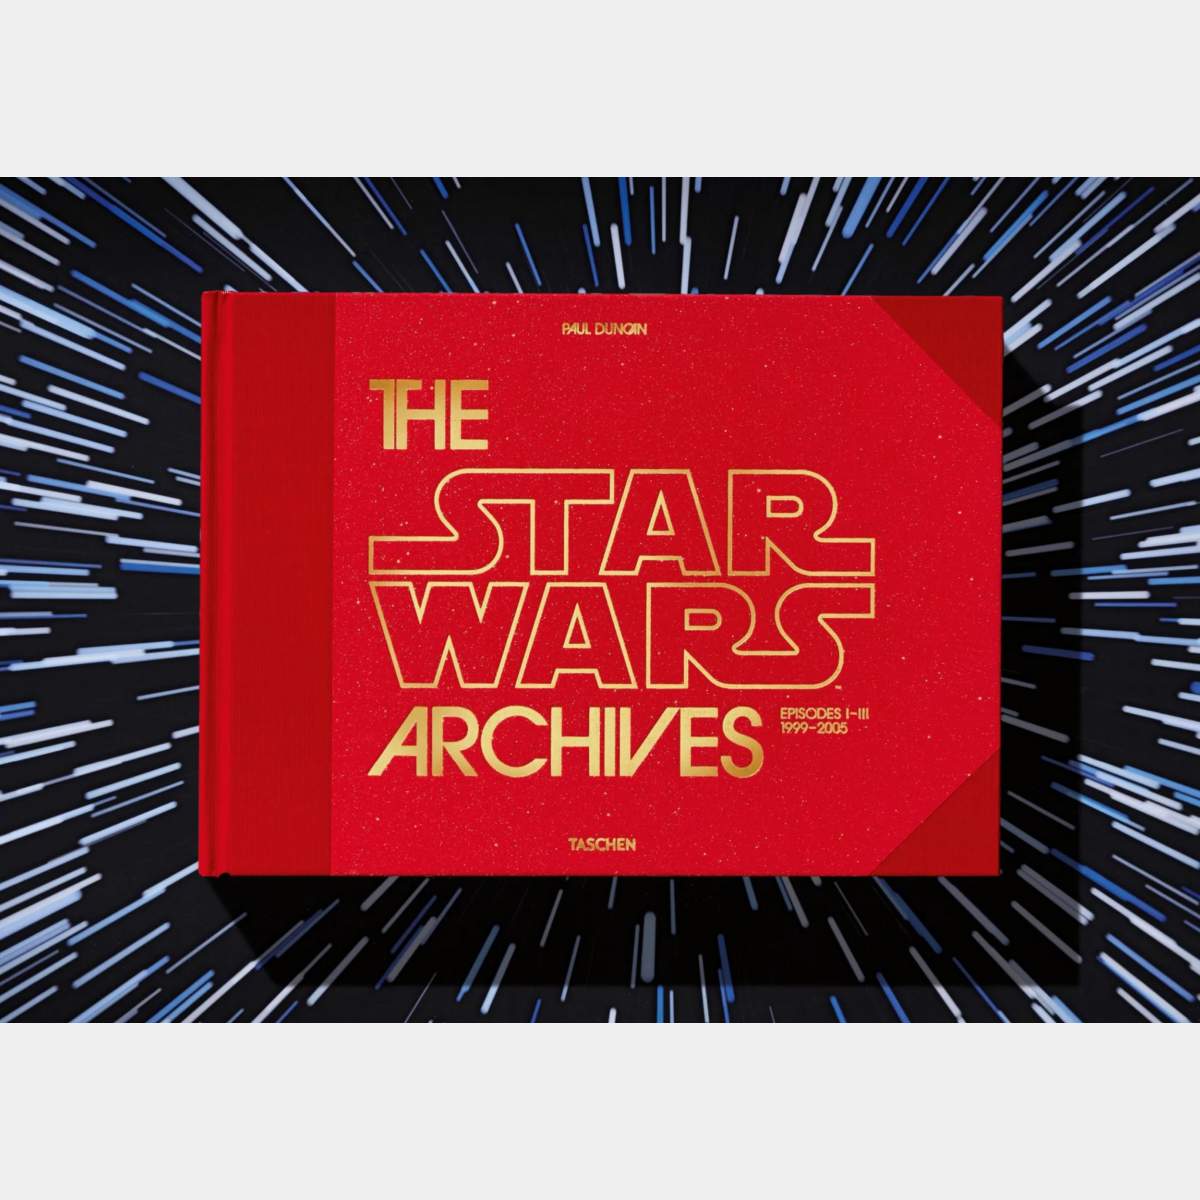 The Star Wars Archives: Volume 2. 1999 - 2005